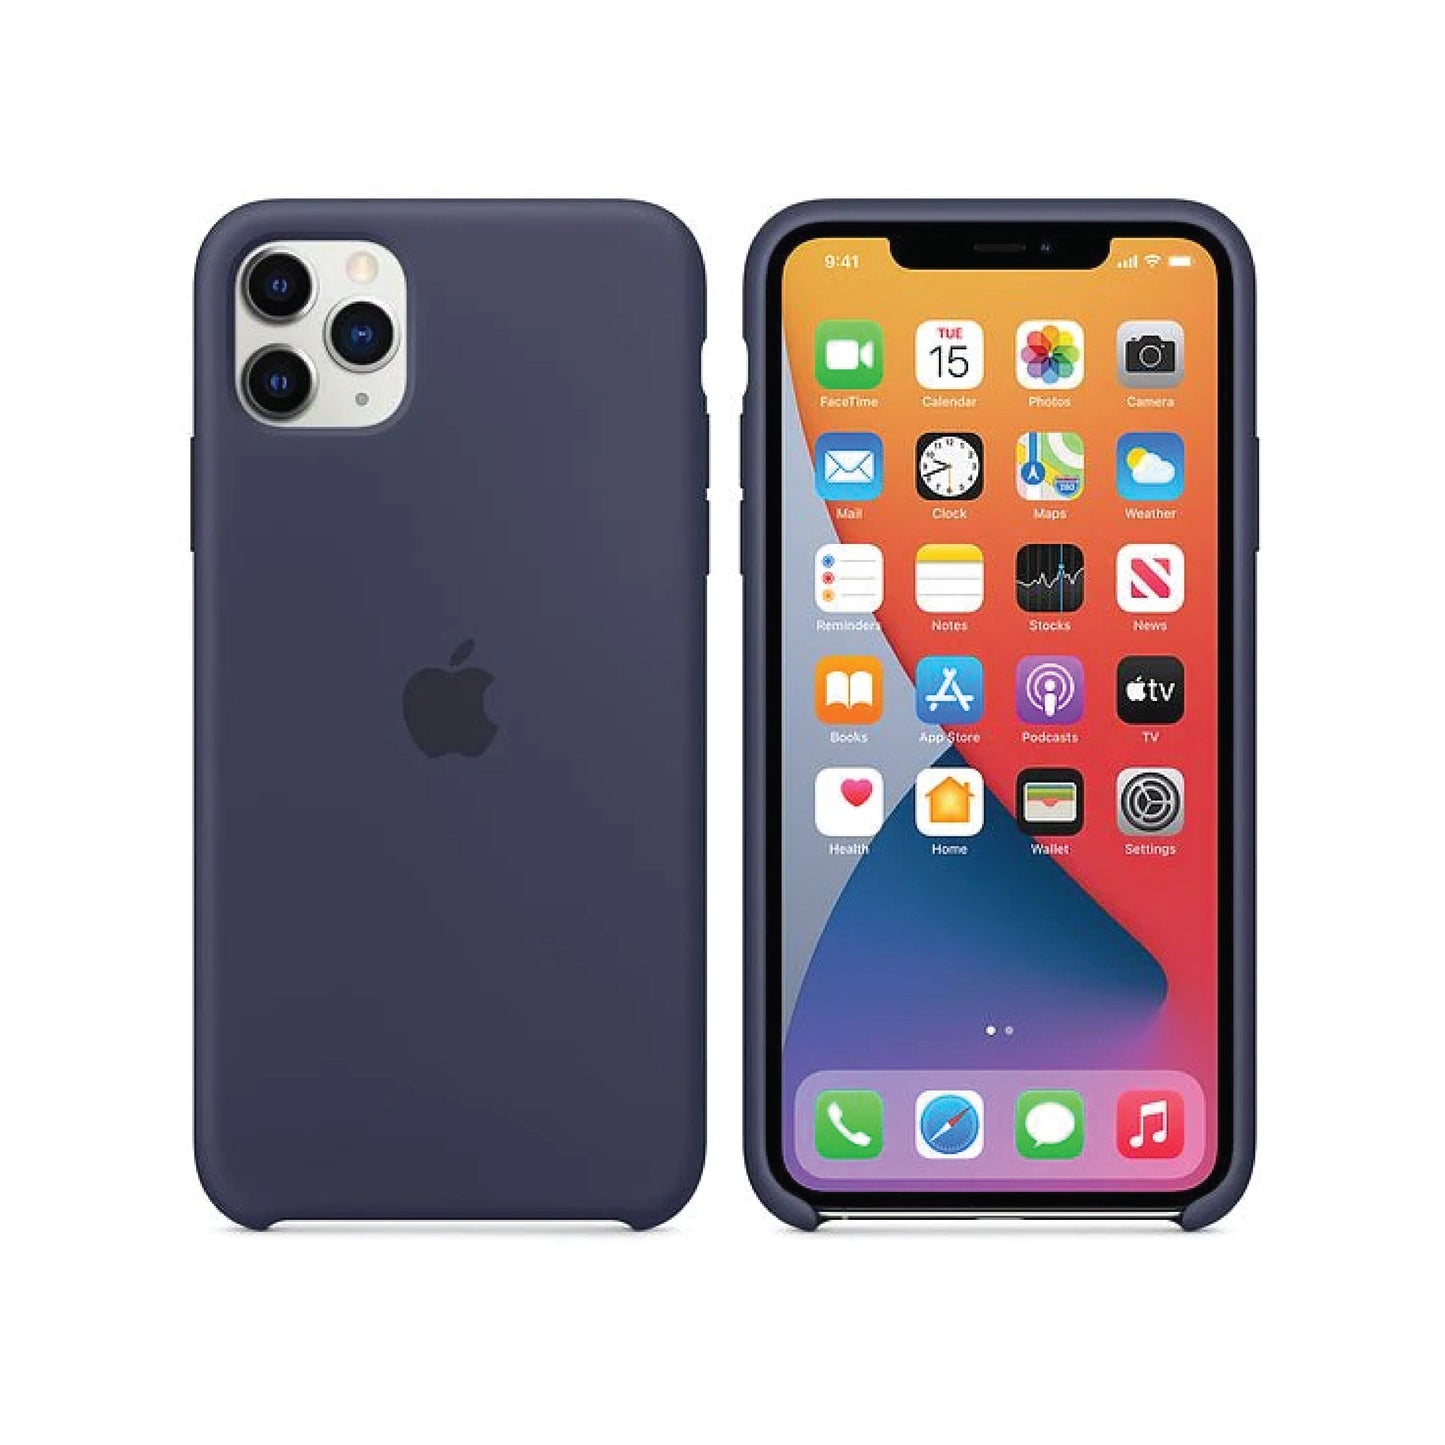 iPhone Official Silicon Case-Navy Blue